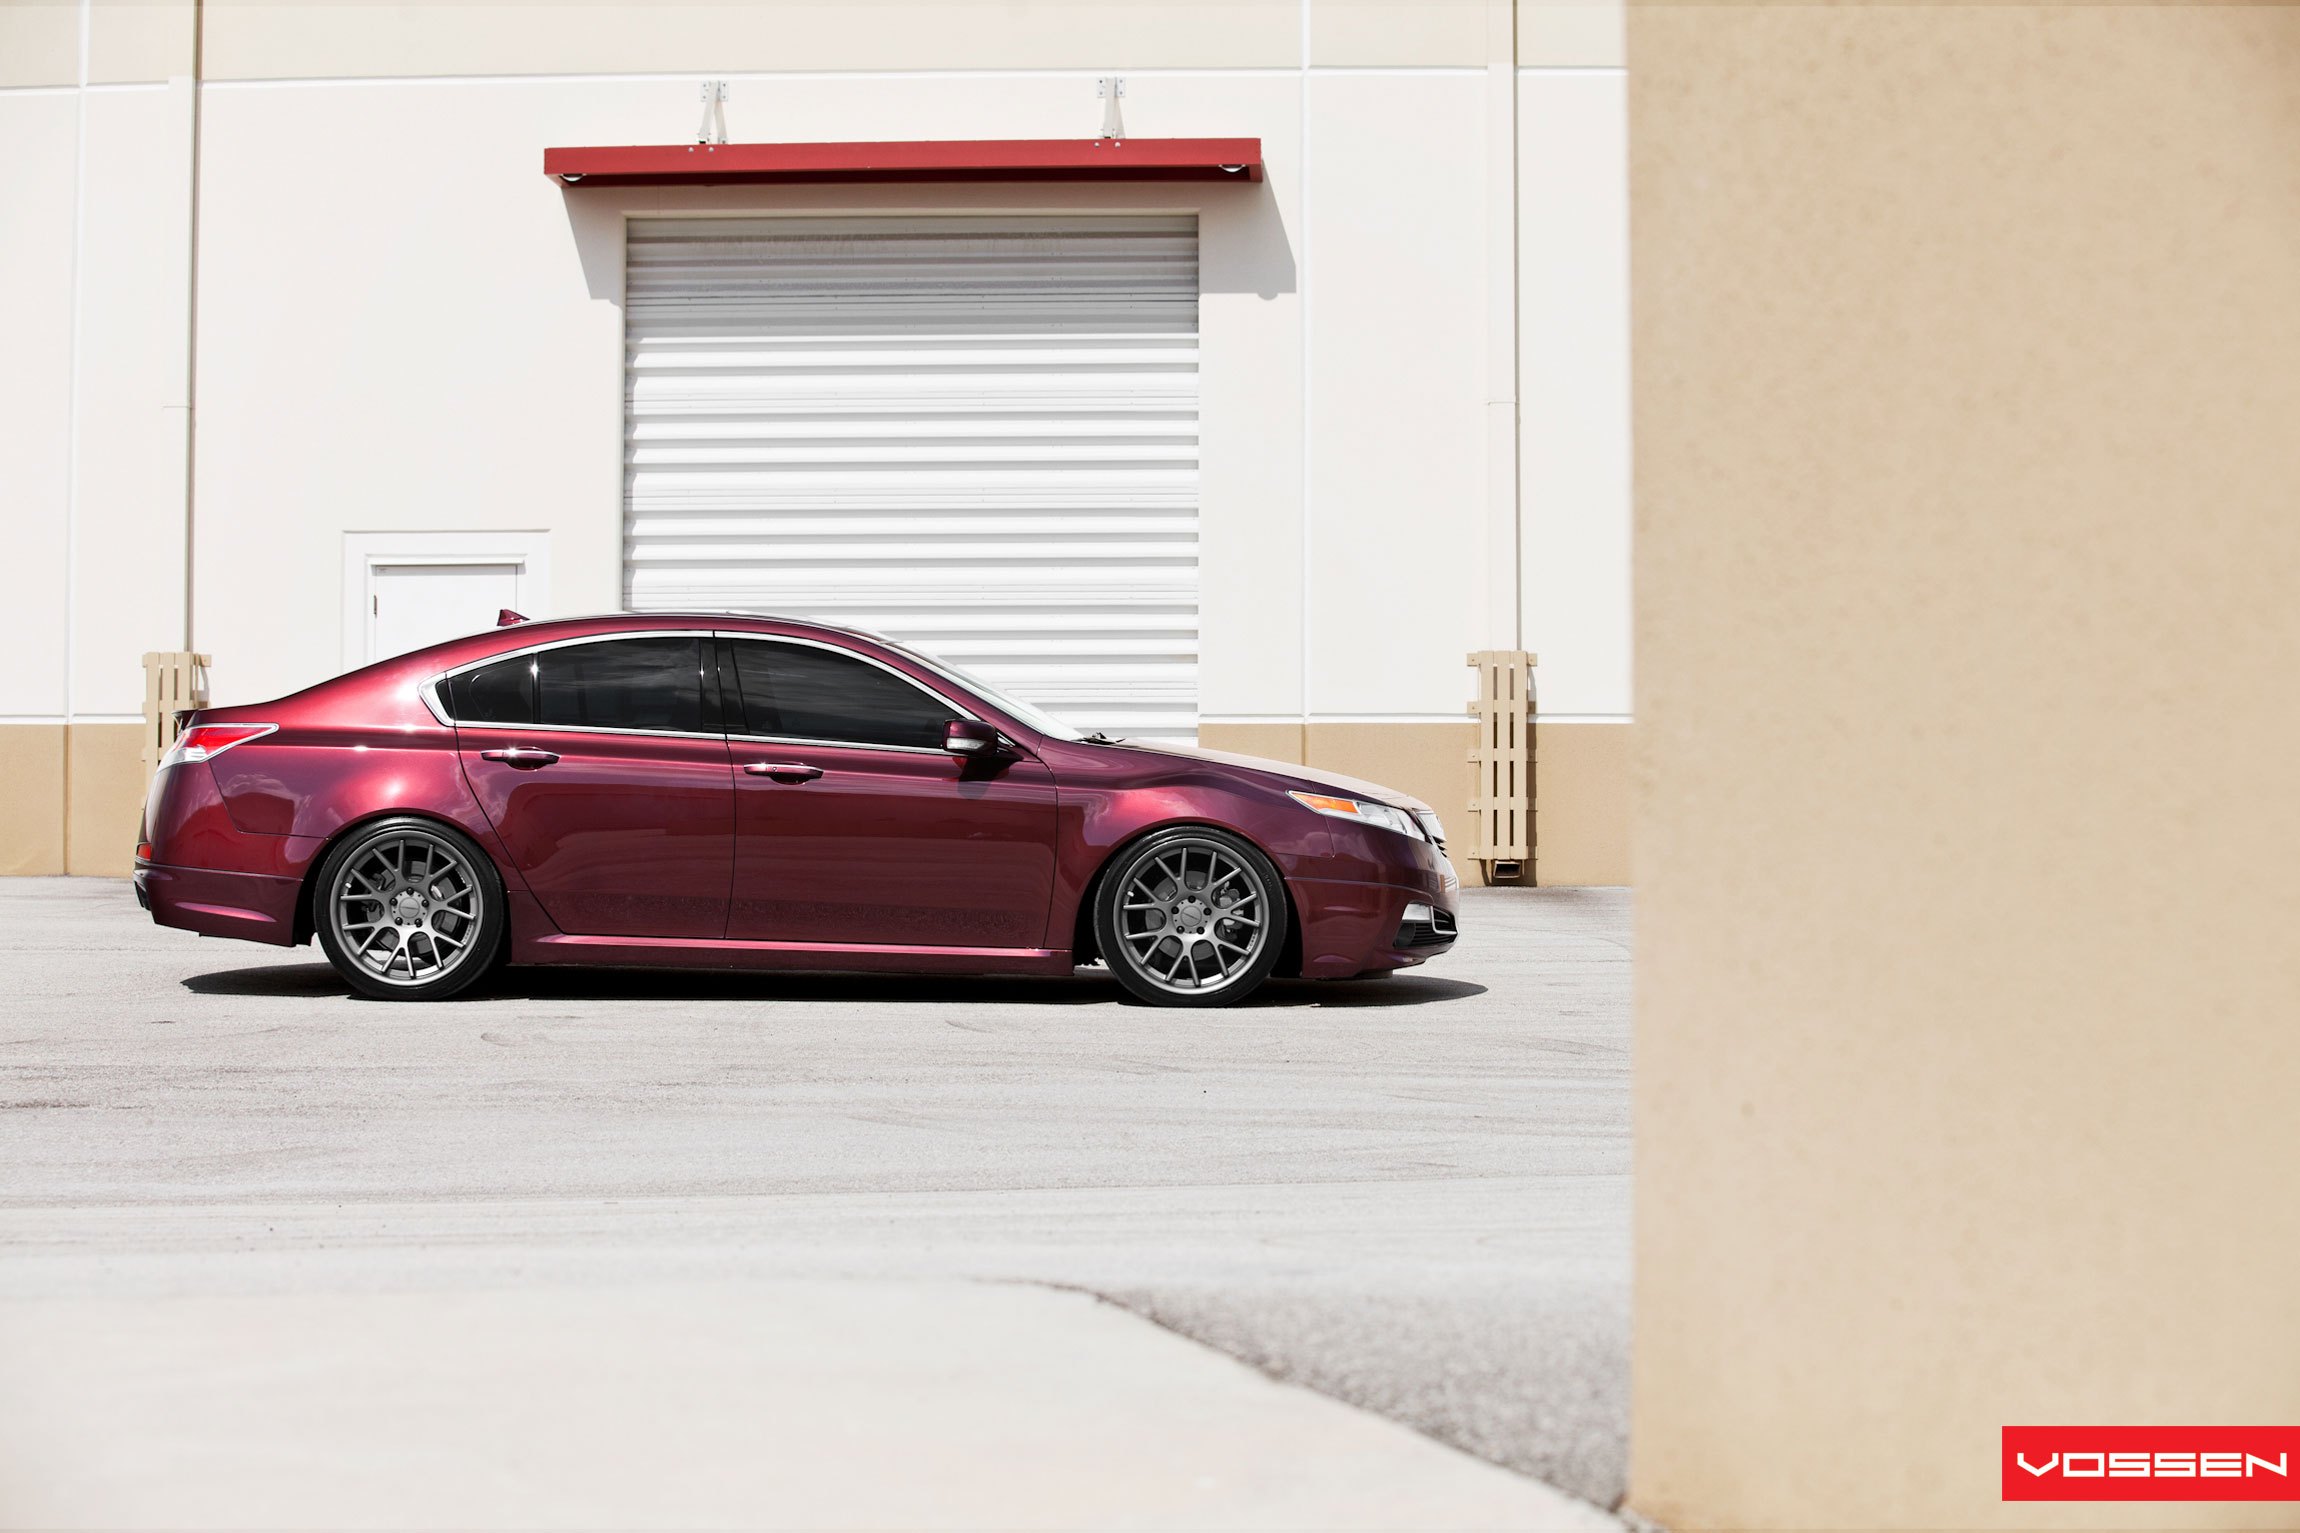 Red Acura TL with Custom Side Skirts - Photo by Vossen